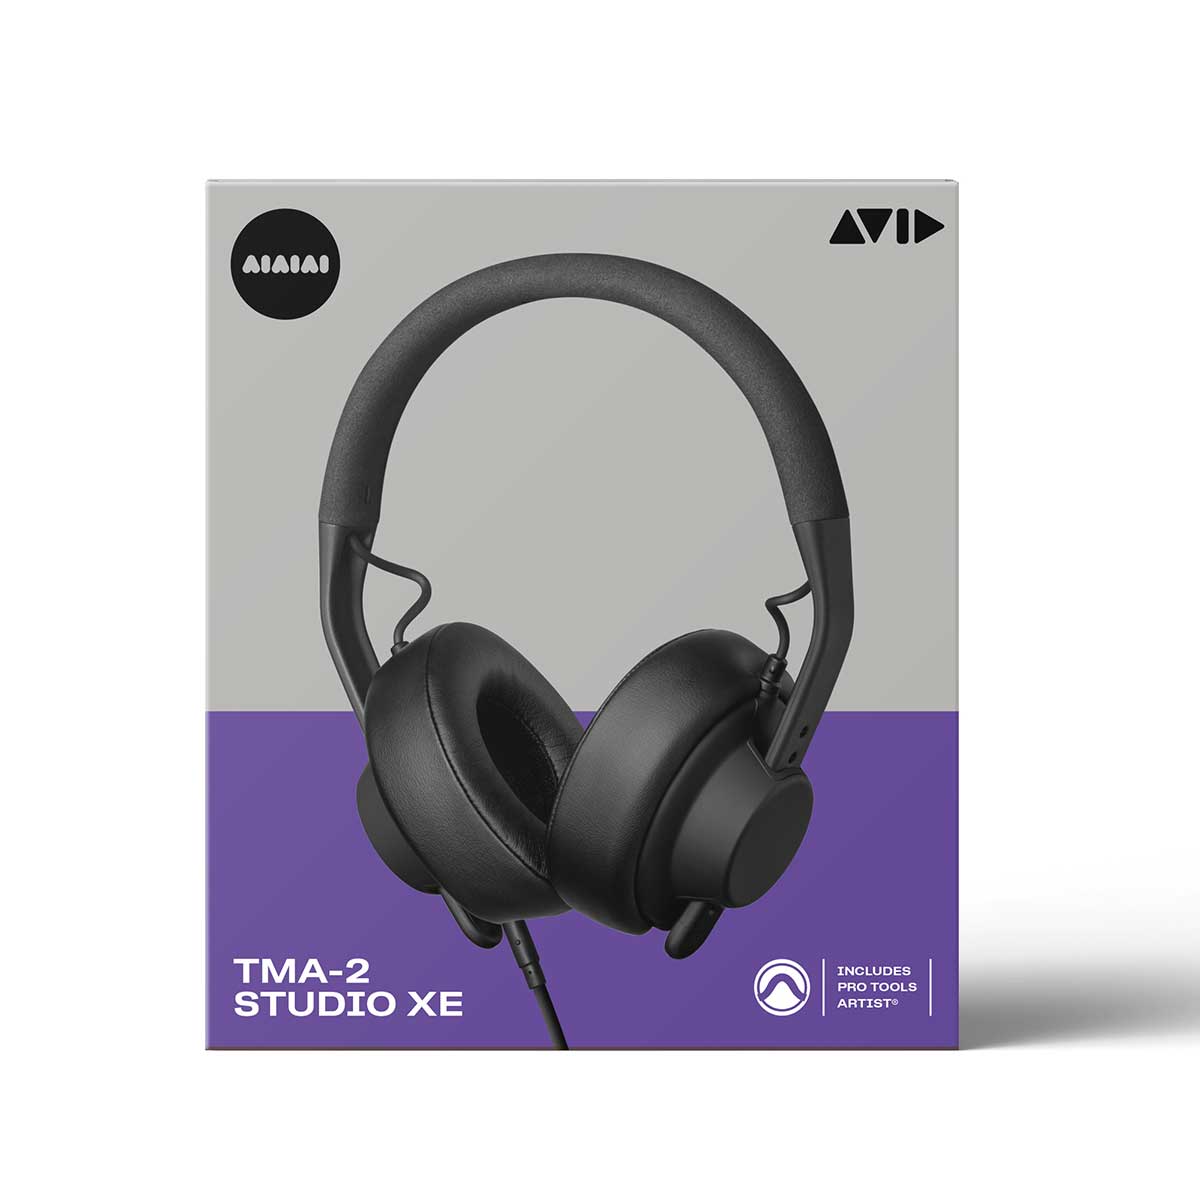 AIAIAI TMA-2 Studio XE Headphones AVID Limited edition with Pro Tools Artist 12 month subscription